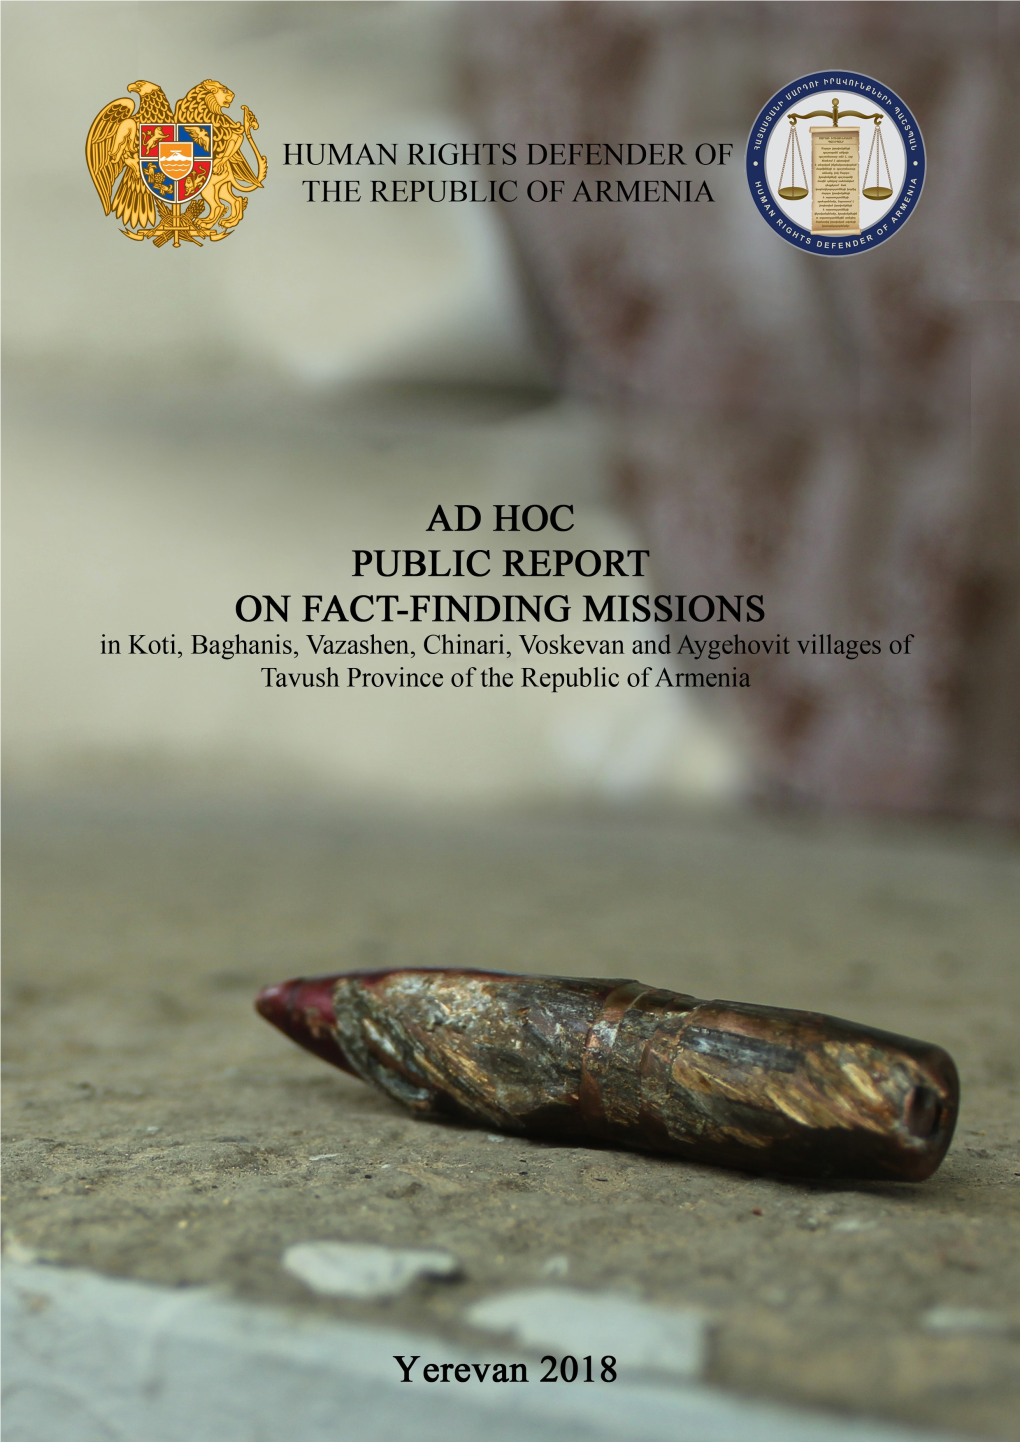 AD HOC PUBLIC REPORT on FACT-FINDING MISSIONS in Koti, Baghanis, Vazashen, Chinari, Voskevan and Aygehovit Villages of Tavush Province of the Republic of Armenia